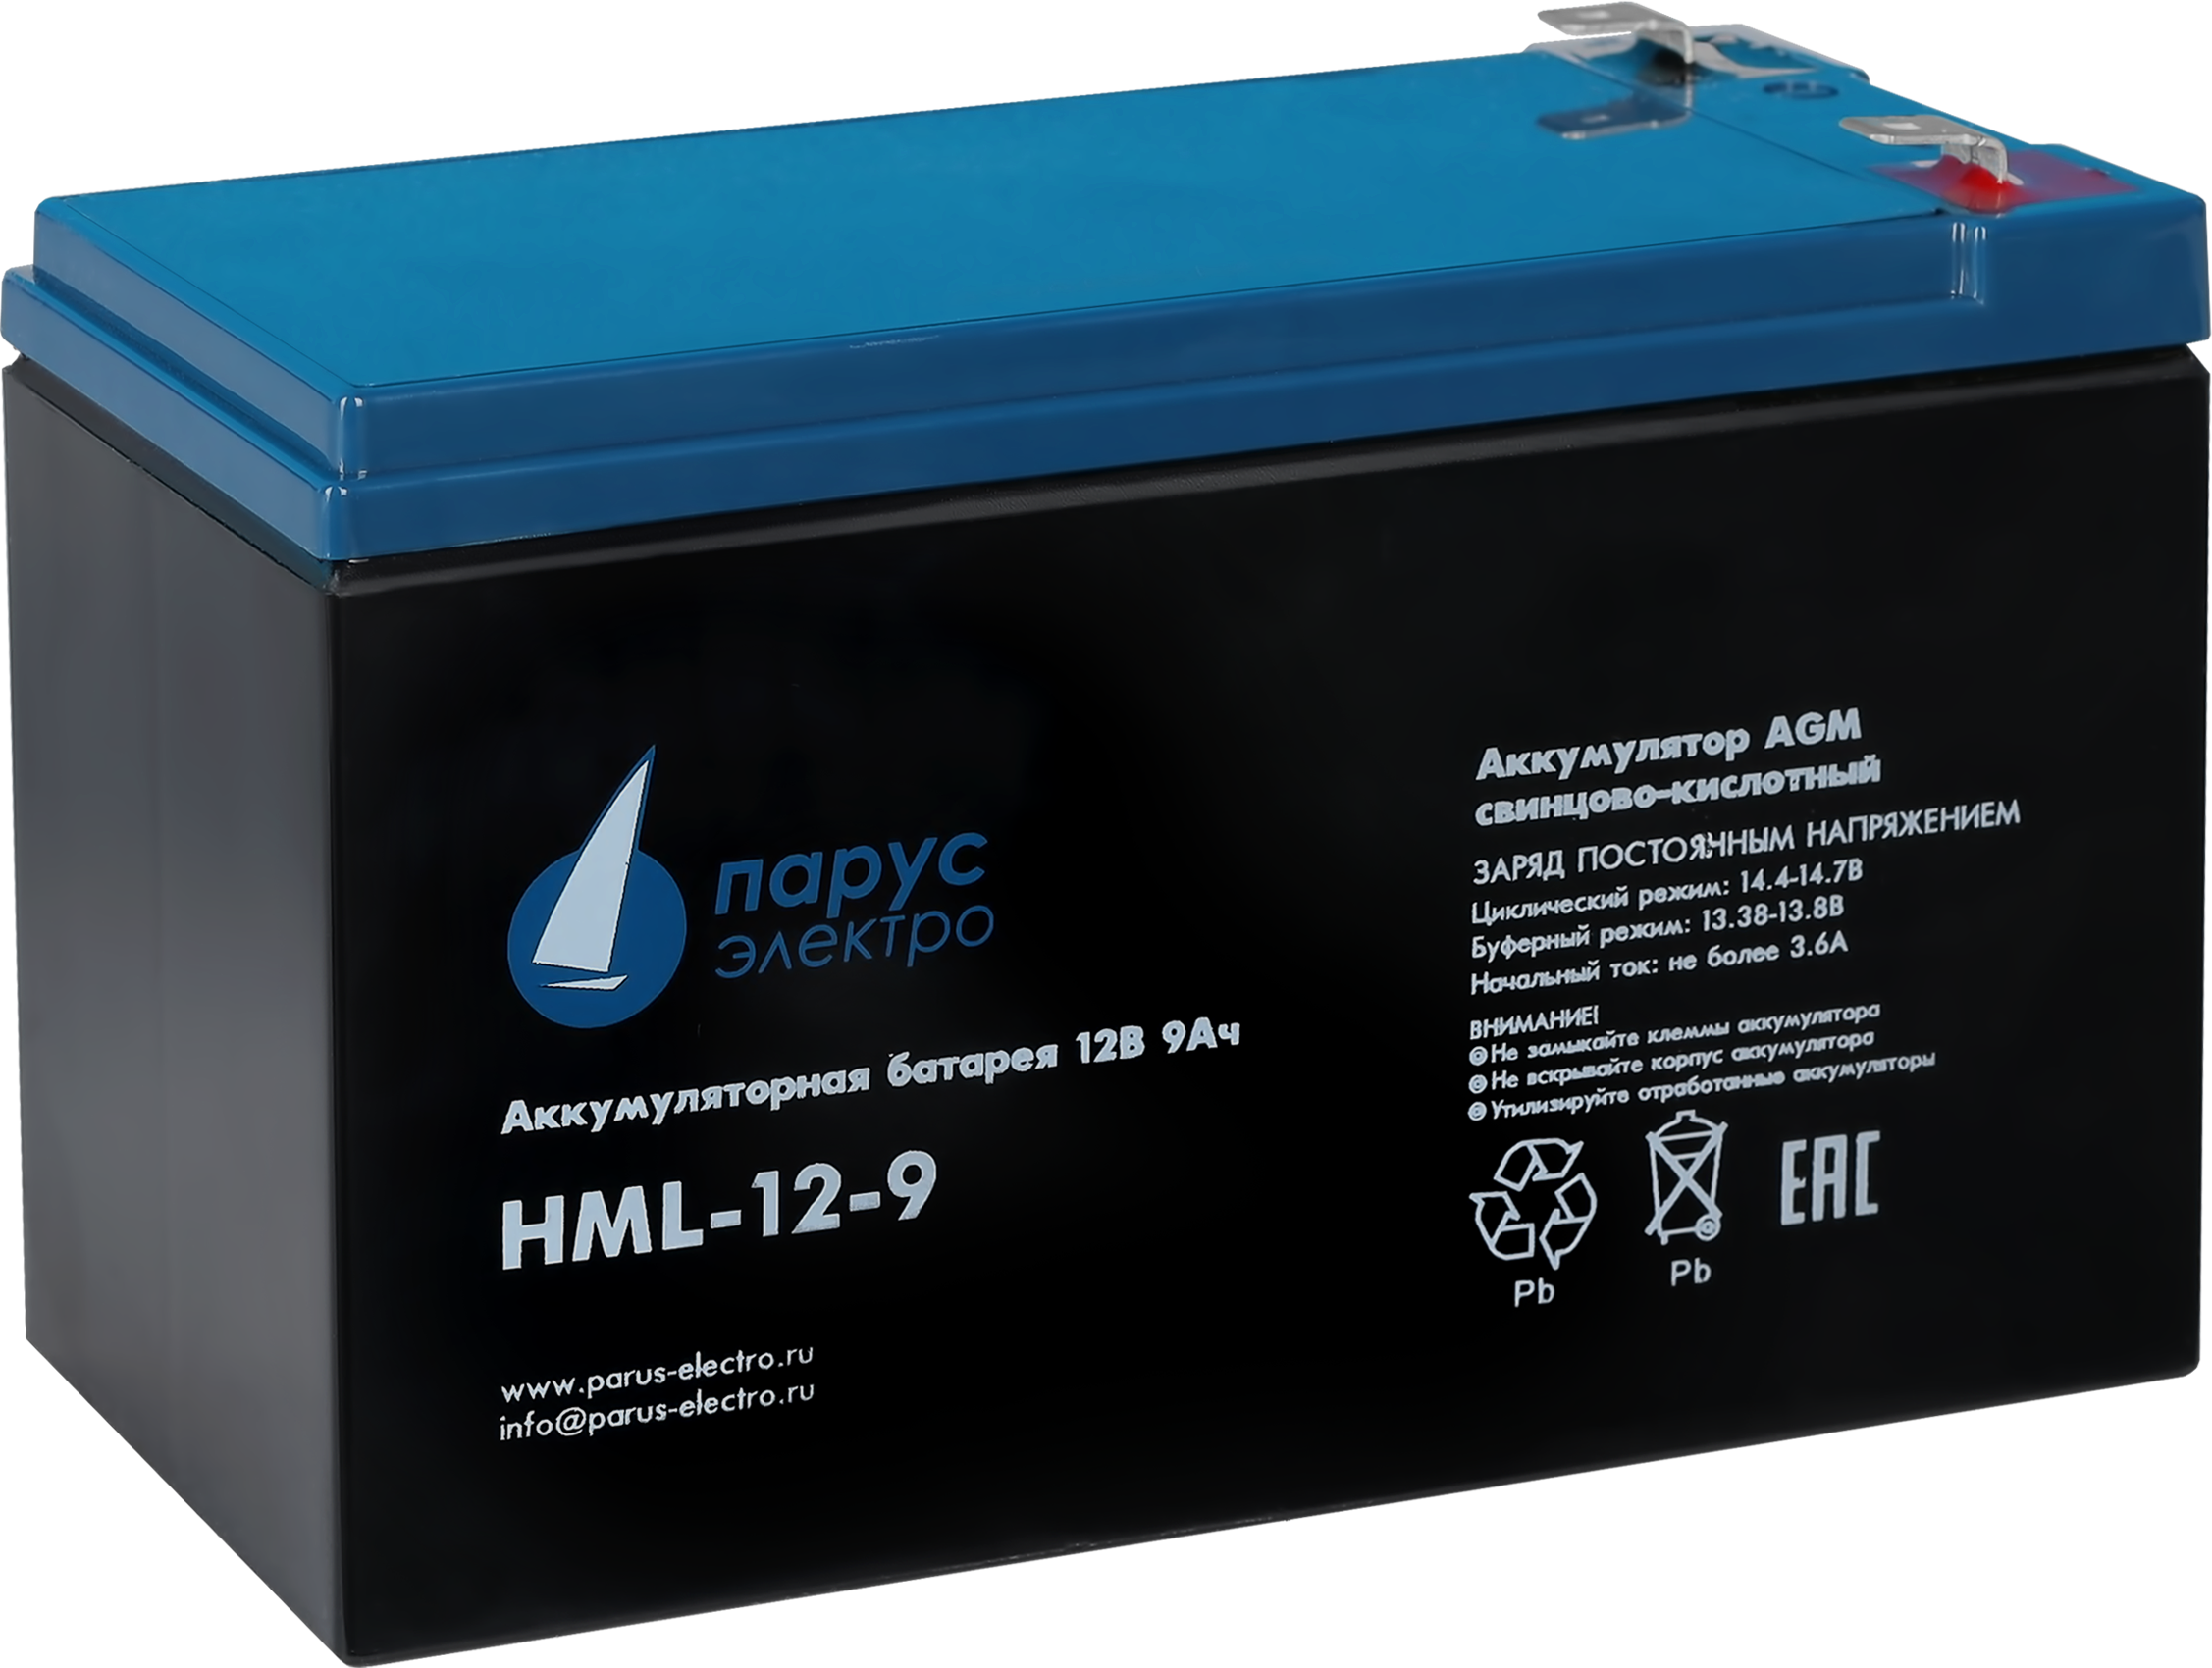 Battery Parus Electro, professional series HML-12-9, voltage 12V, capacity 9Ah (discharge 20 hours), max. discharge current (5sec) 135A, max. charge current 3.6A, lead-acid type AGM, terminals F2, LxWxH 151x65x94mm., total height with terminals 101mm., weight 2.9kg., service life 12 years.